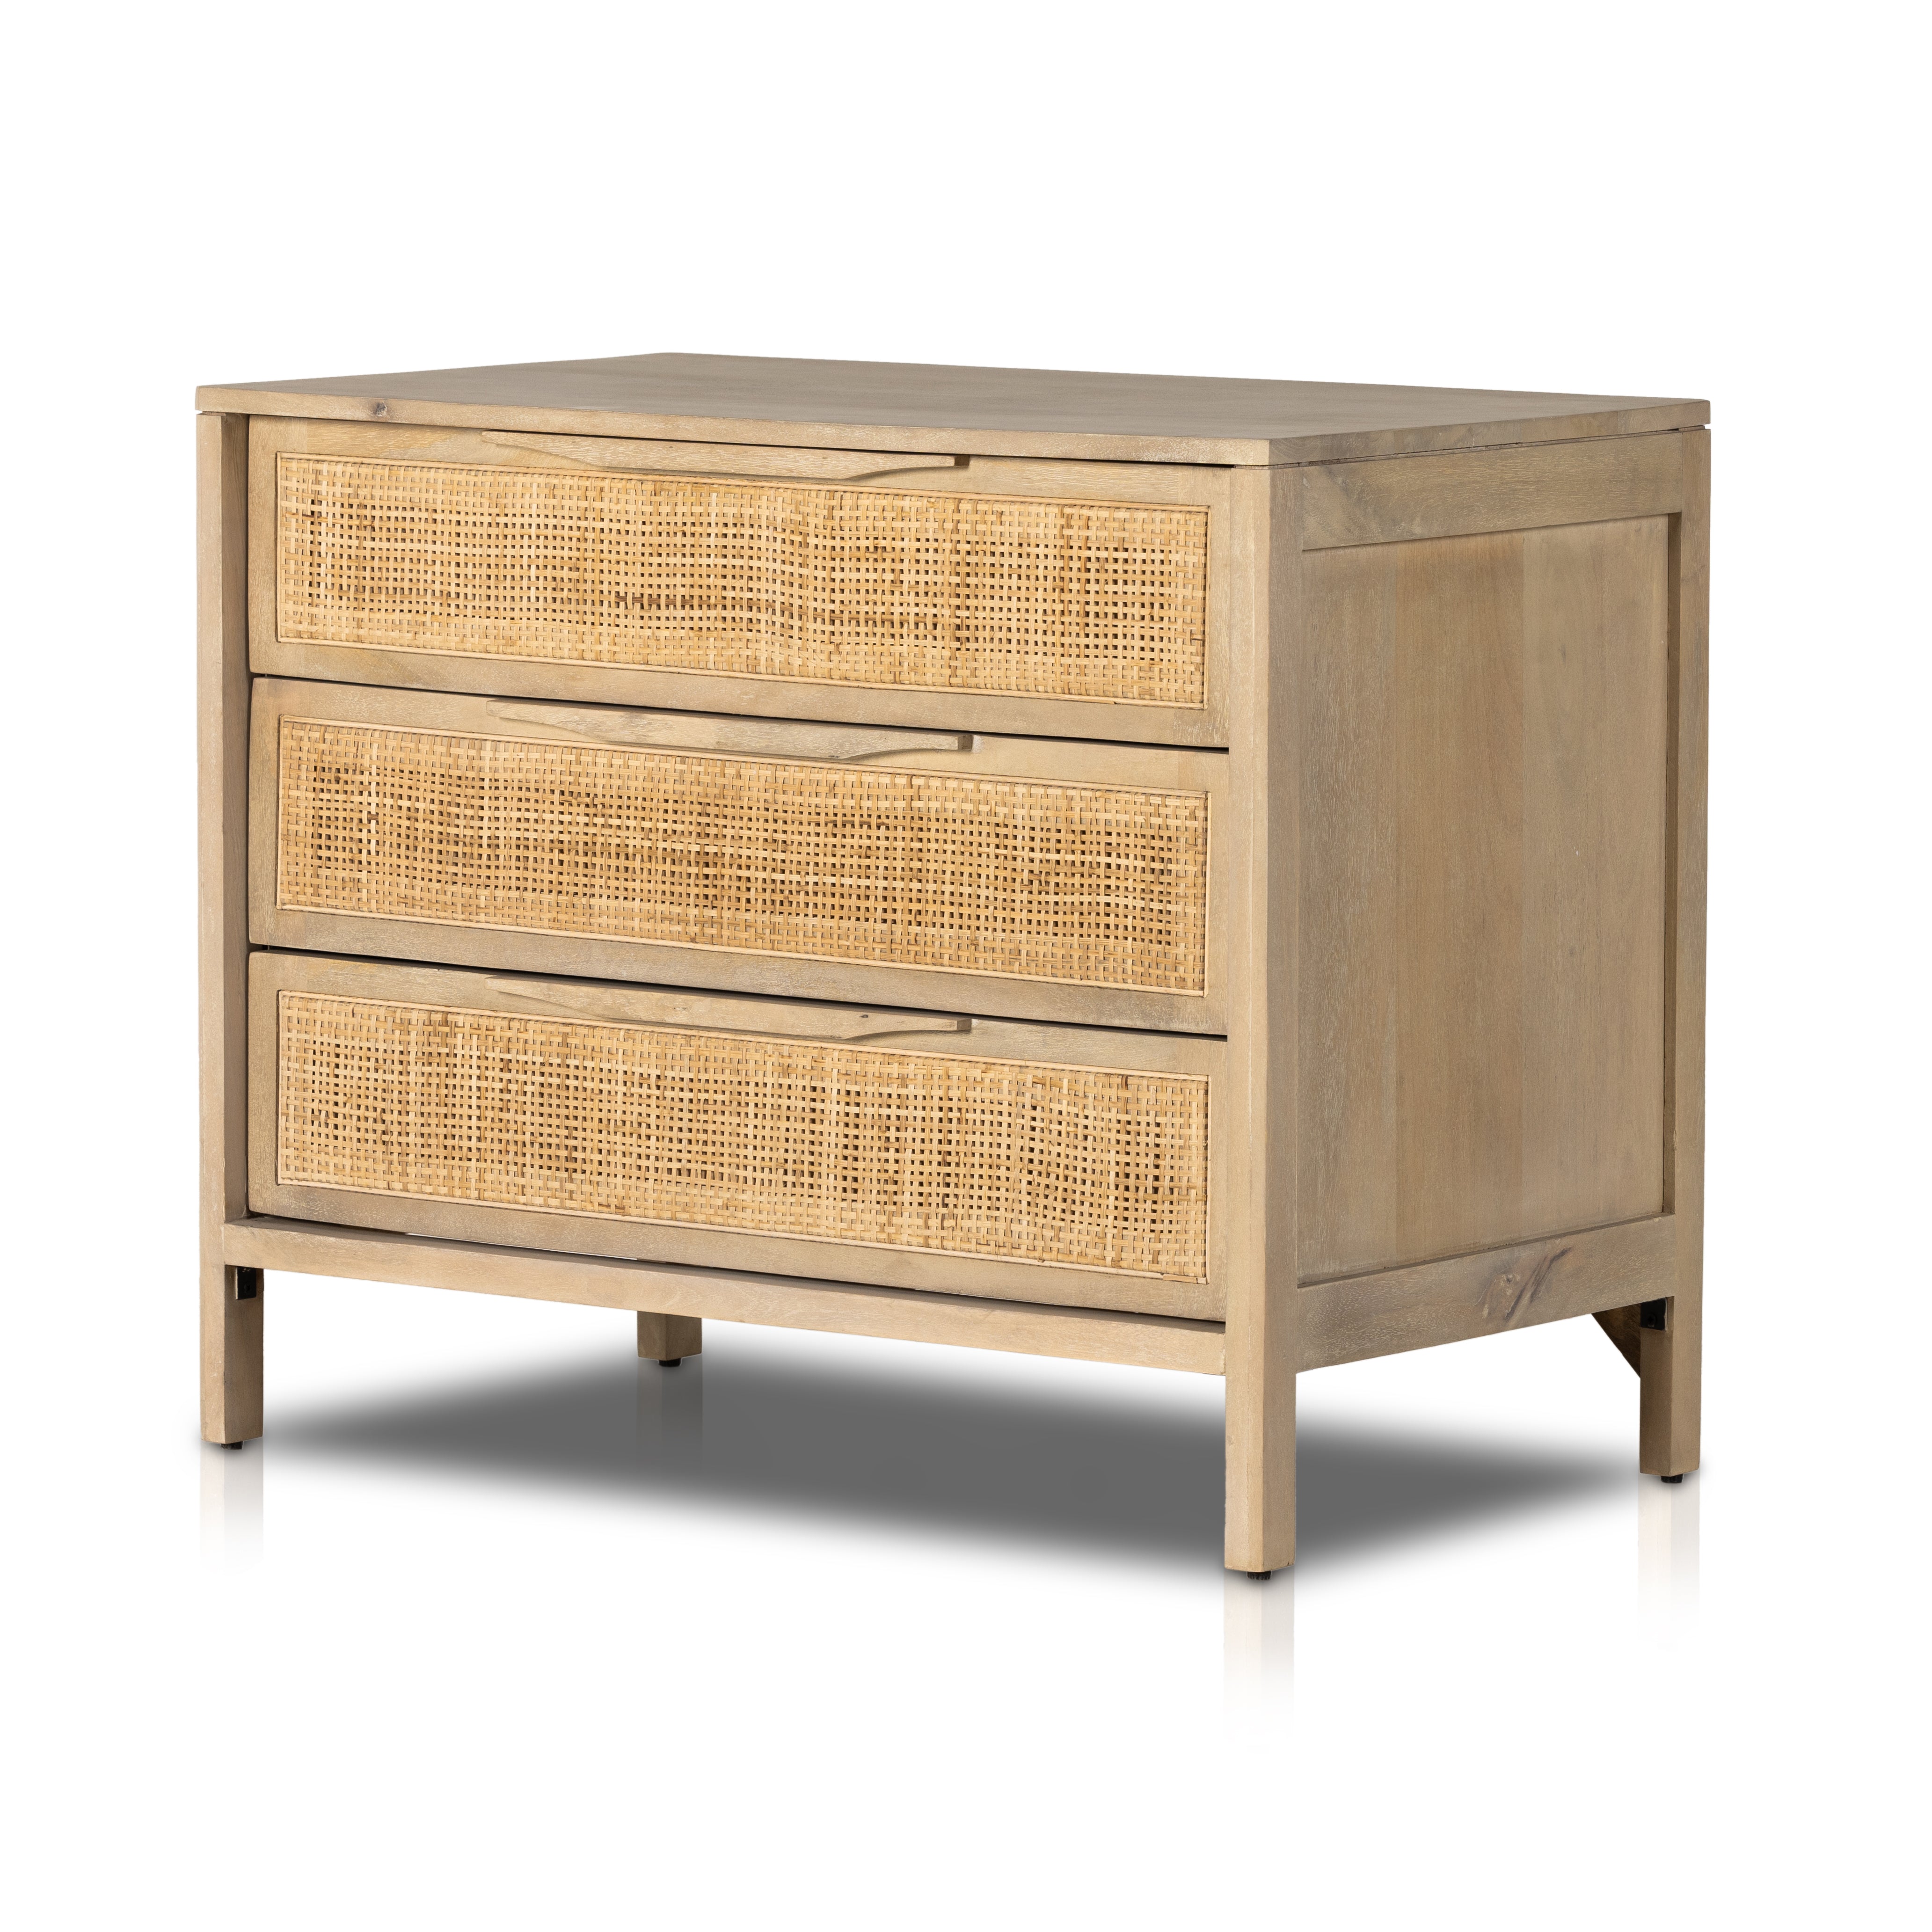 Natural mango frames inset woven cane, for a light, textural look with organic allure. Three spacious drawers provide plenty of closed storage. Amethyst Home provides interior design, new home construction design consulting, vintage area rugs, and lighting in the Des Moines metro area.